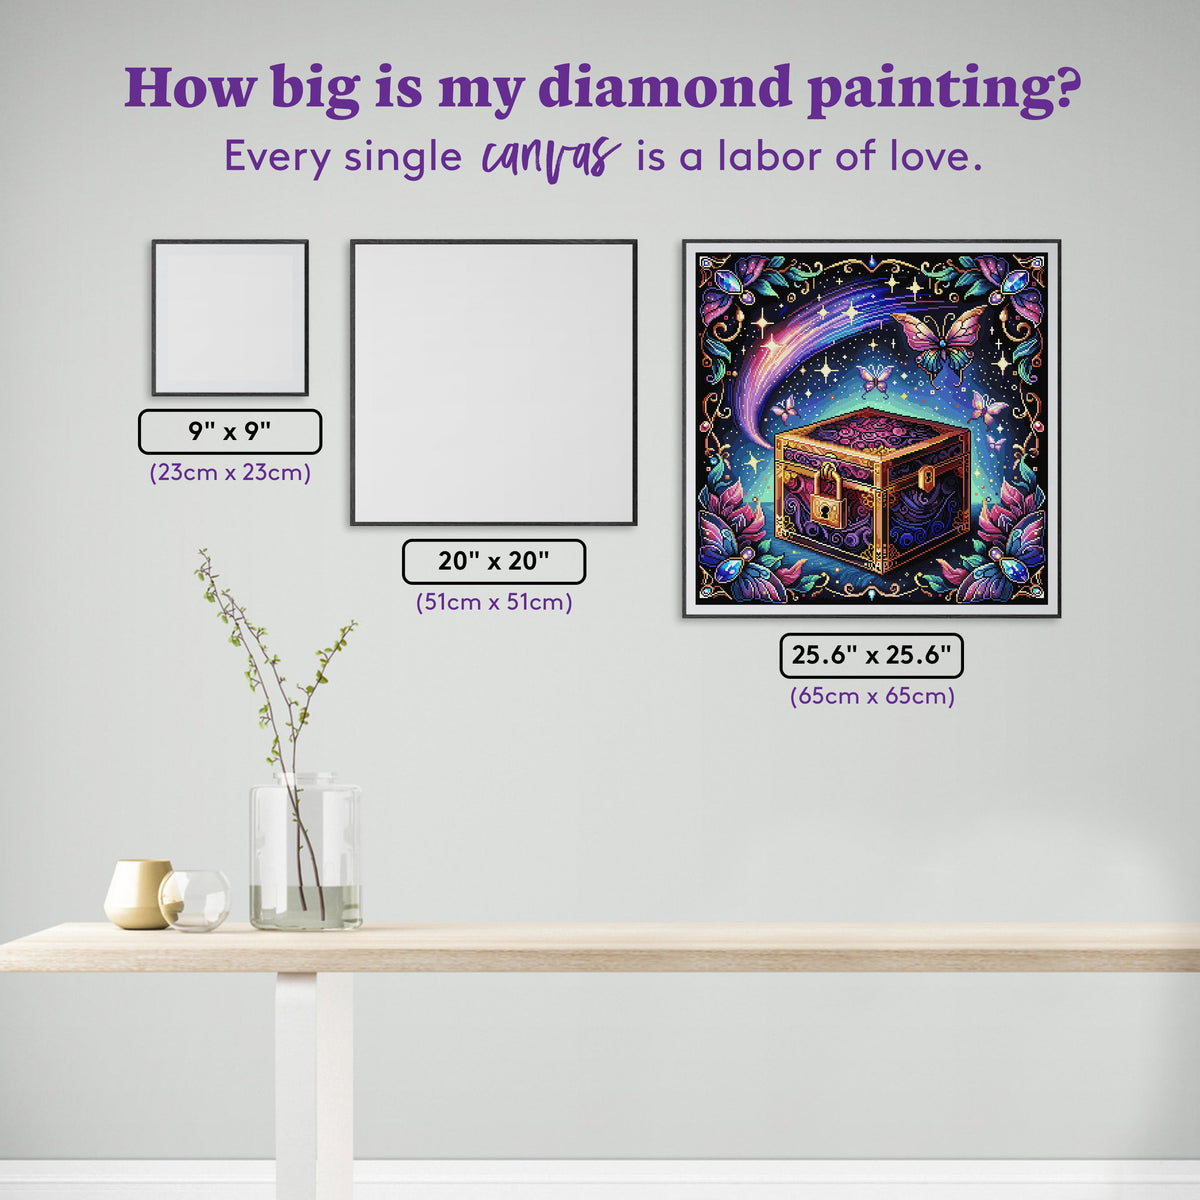 Diamond Painting Mesmerizing Secret 25.6" x 25.6" (65cm x 65cm) / Square With 65 Colors including 4ABs and 1 Iridescent Diamond and 4 Fairy Dust Diamonds / 68,121